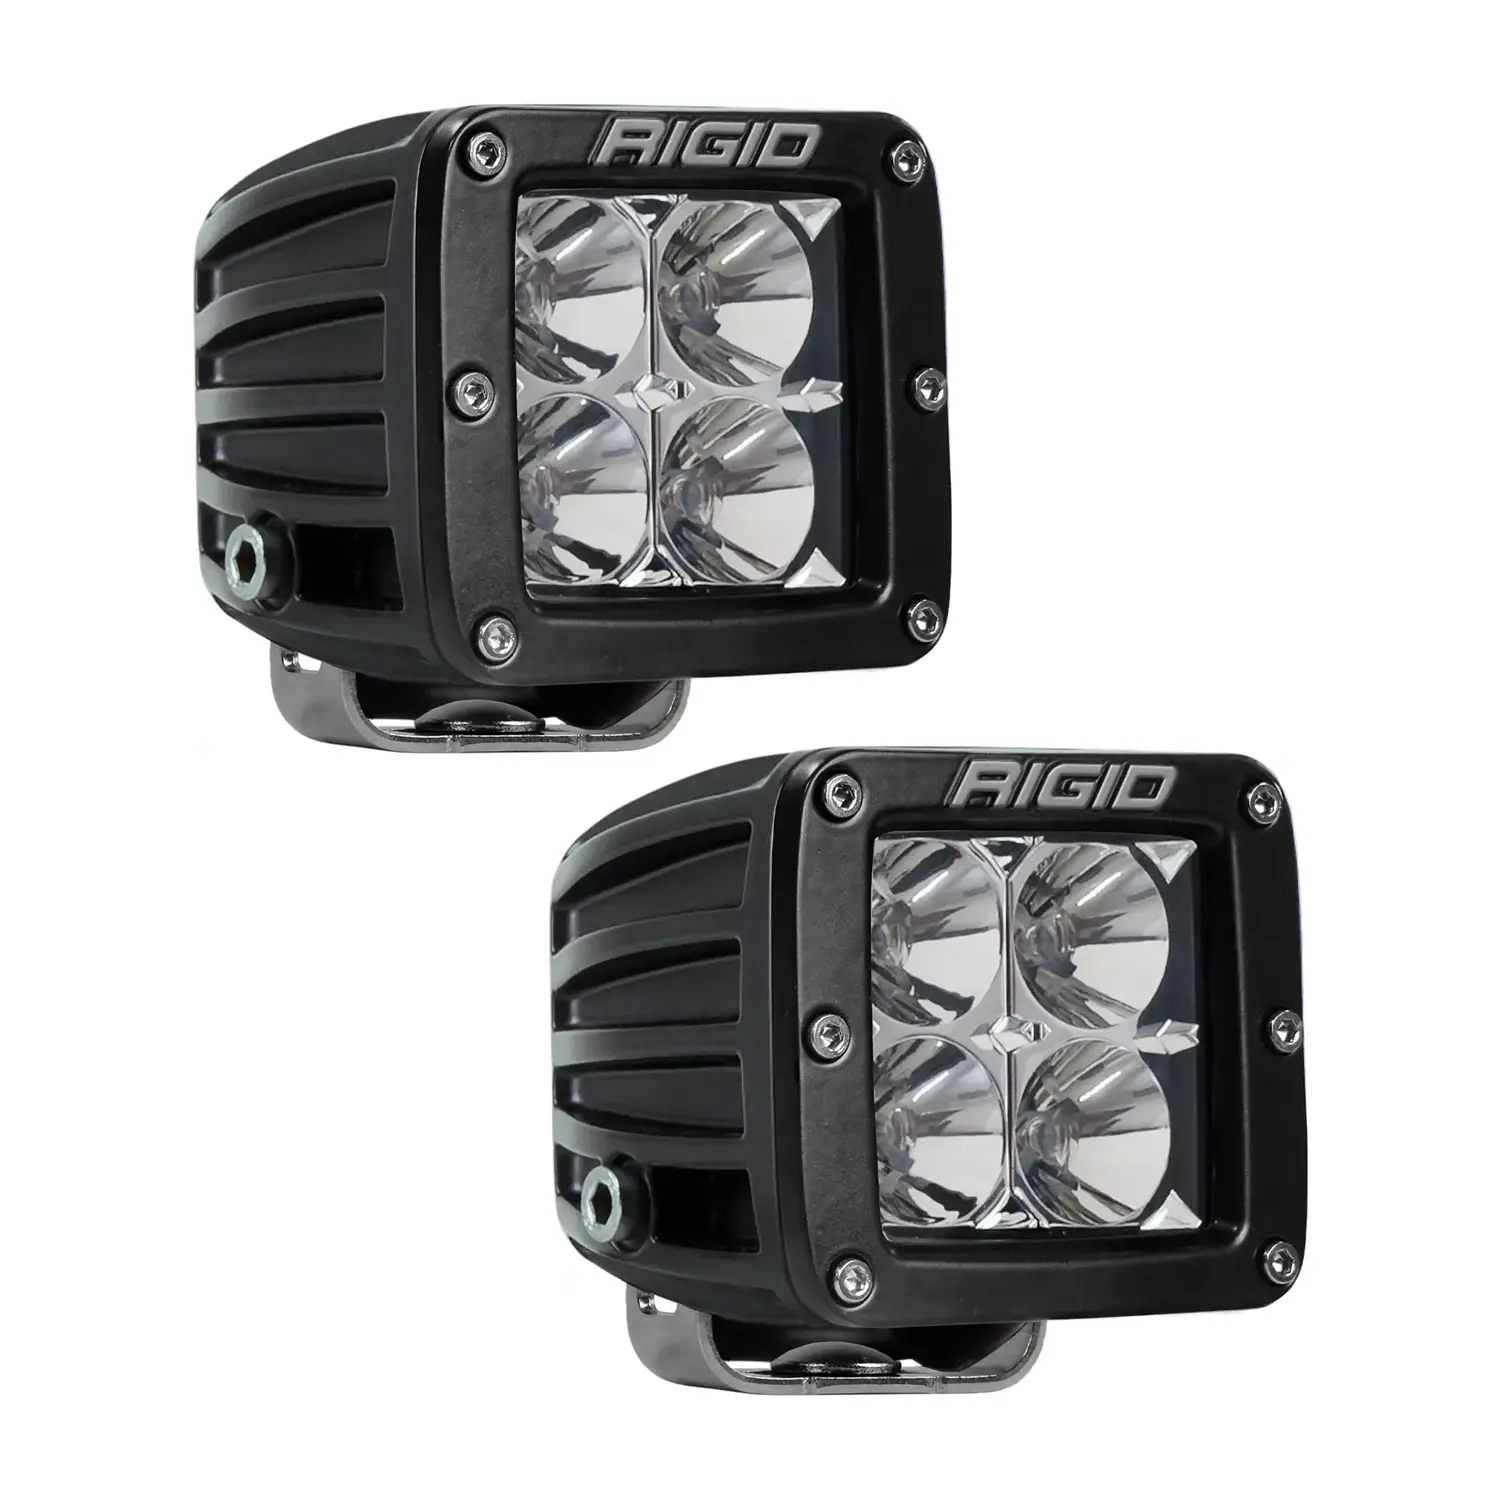 Luces led para tractores - NORDIC LIGHTS® - Nordic Lights Ltd.